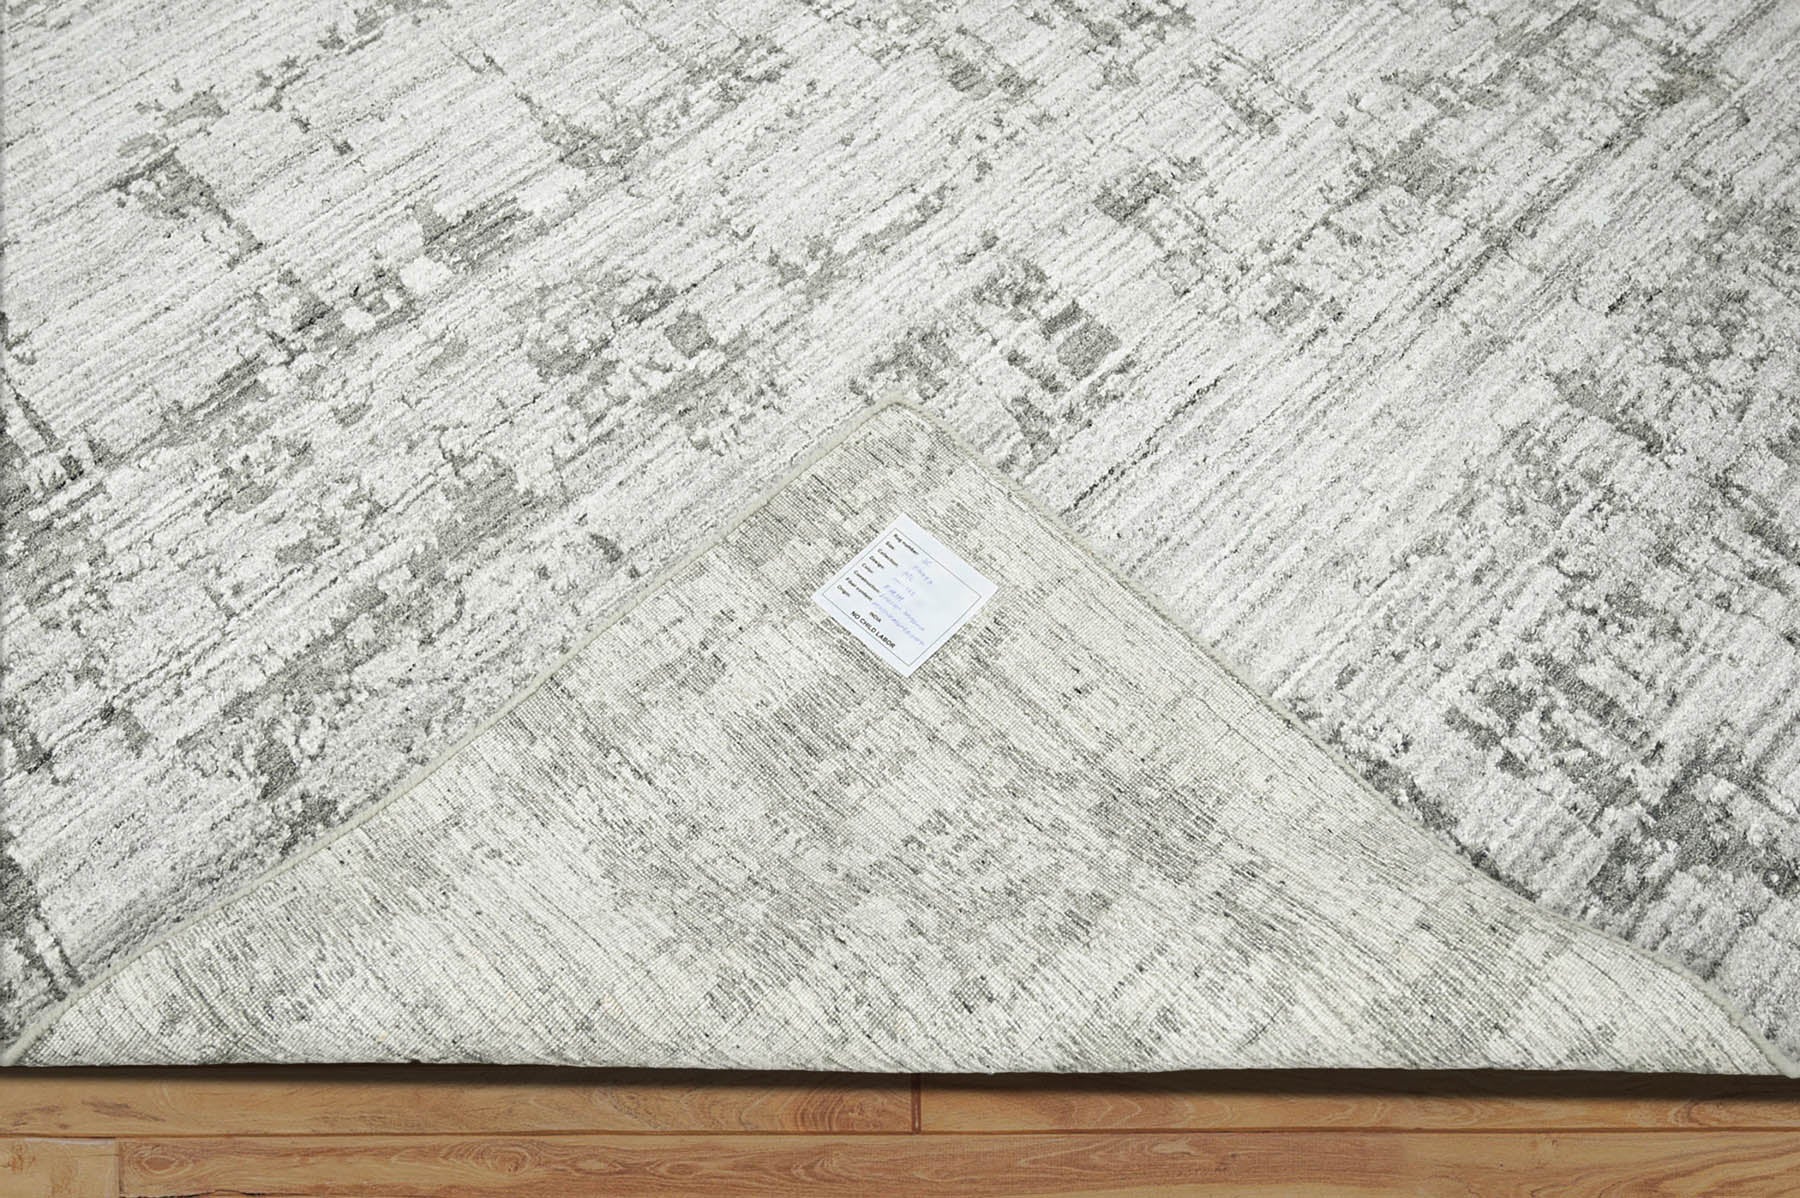 Penix 8x10 Gray, Silver Hand Knotted 100% Wool Modern & Contemporary Oriental Area Rug